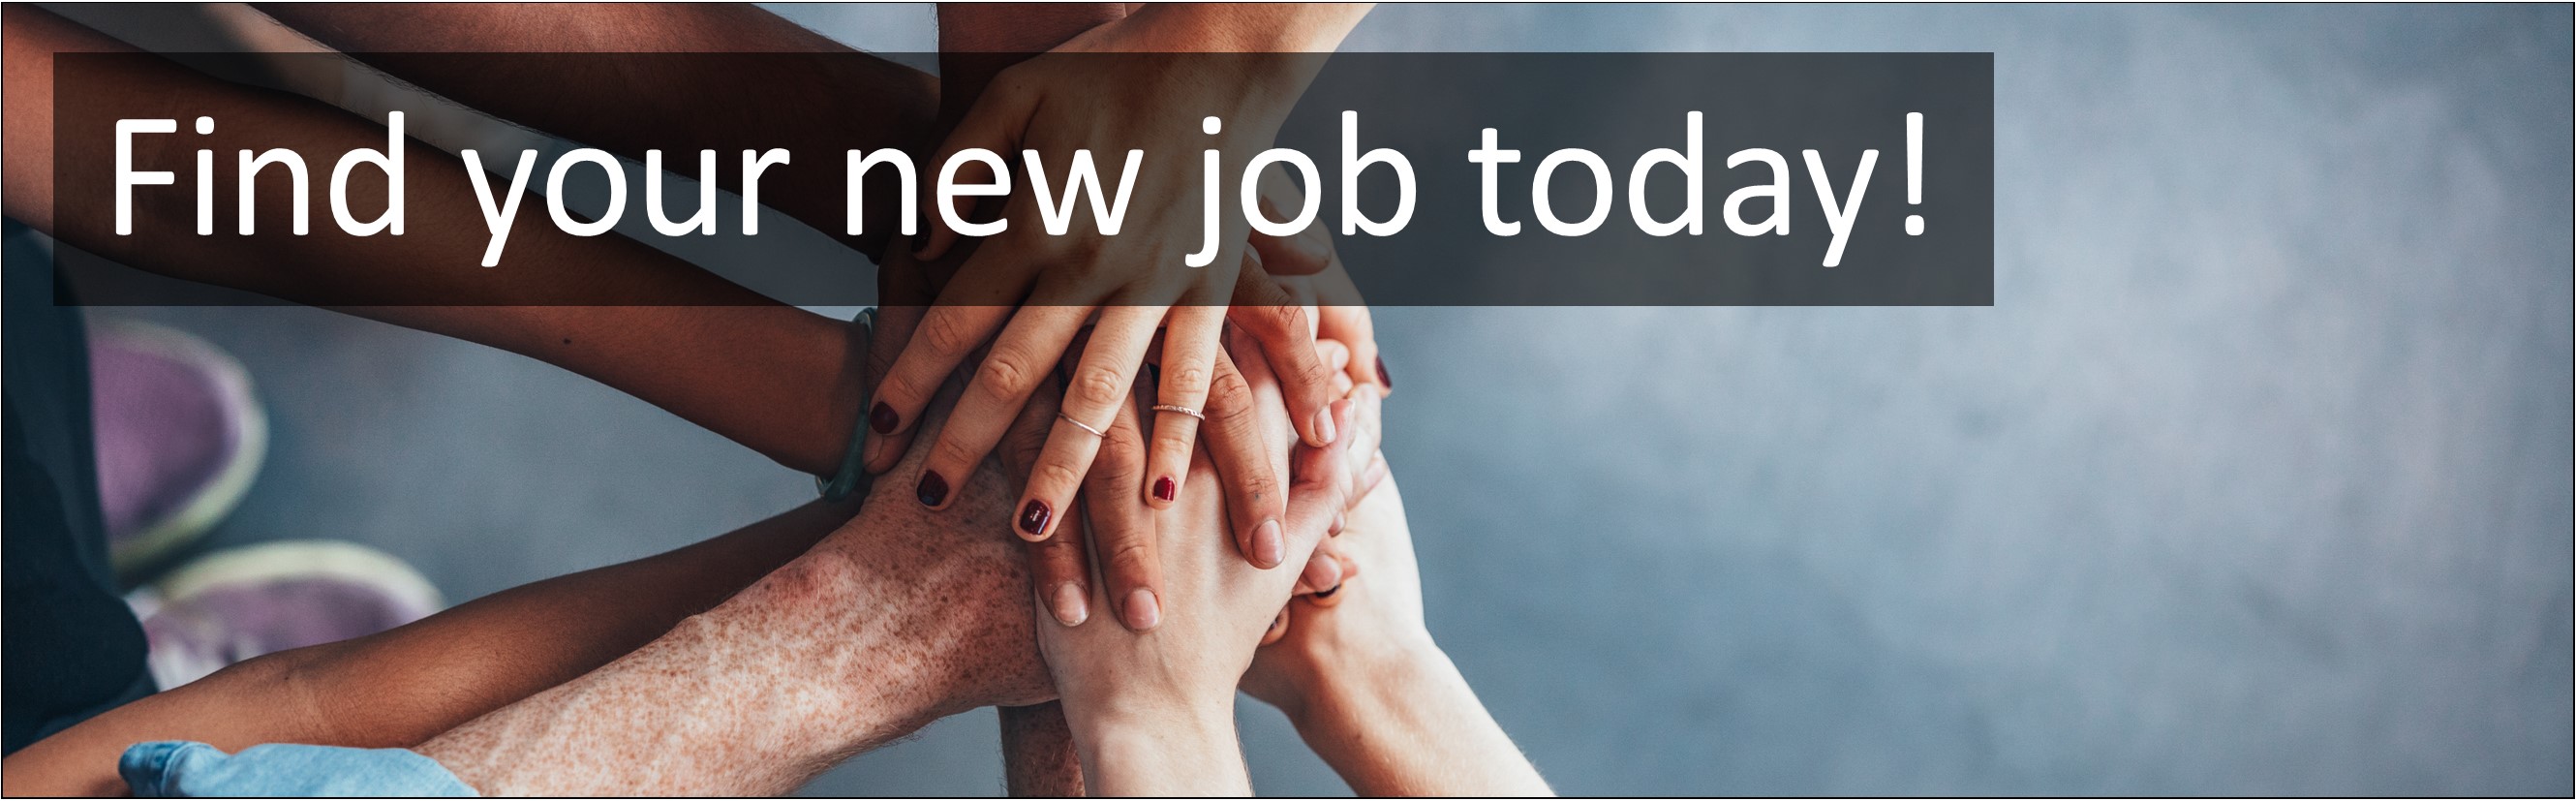 Social Care Jobs. Residential Support Worker Jobs, Careers & Vacancies in Sunderland, Tyne and Wear, North East England Advertised by AWD online – Multi-Job Board Advertising and CV Sourcing Recruitment Services